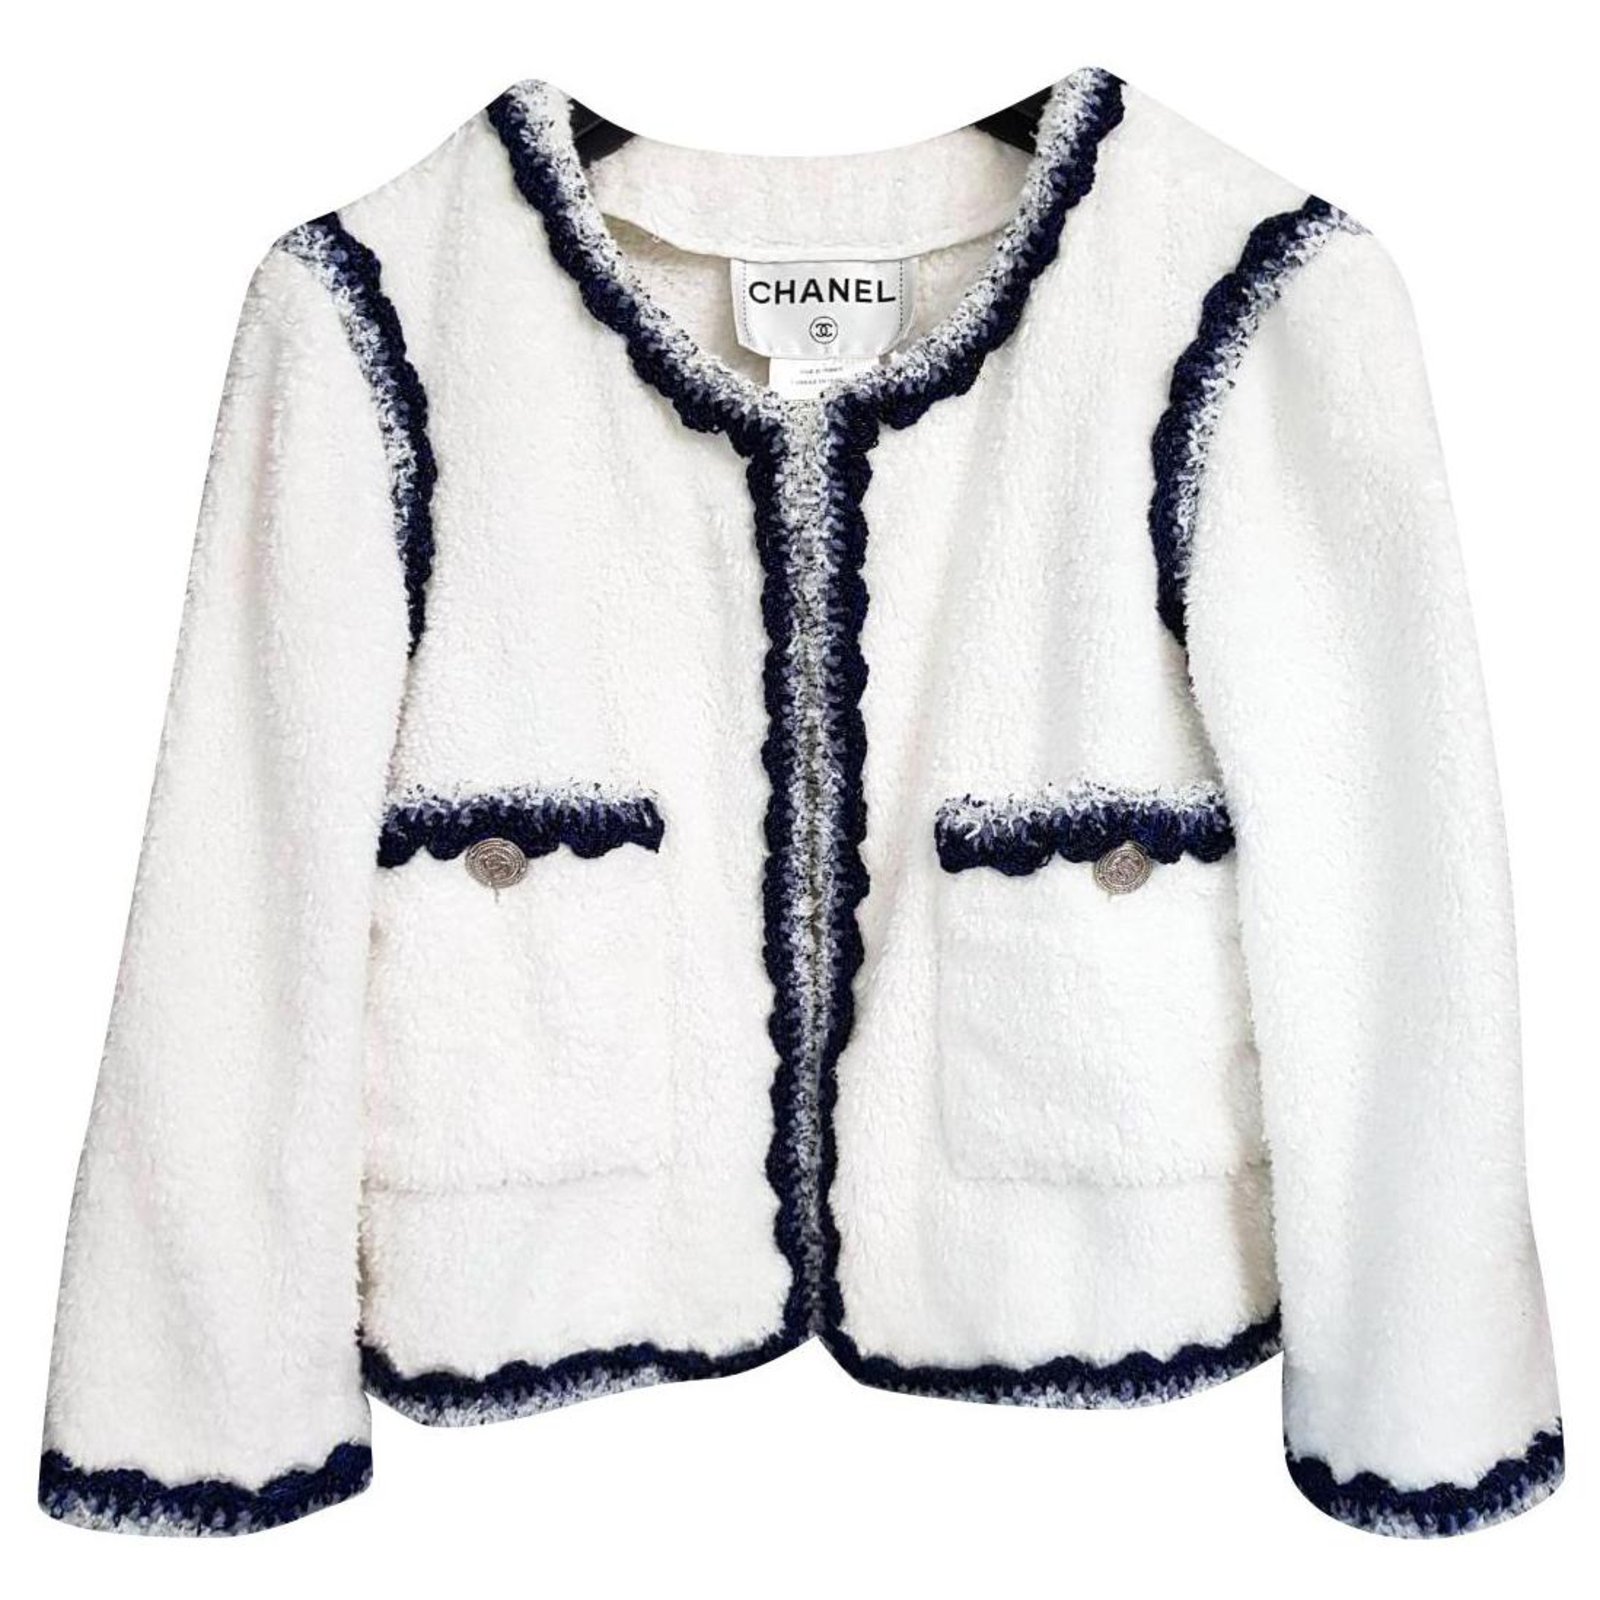 Chanel Cotton Jacket with Contrast Trim in Black/White — UFO No More